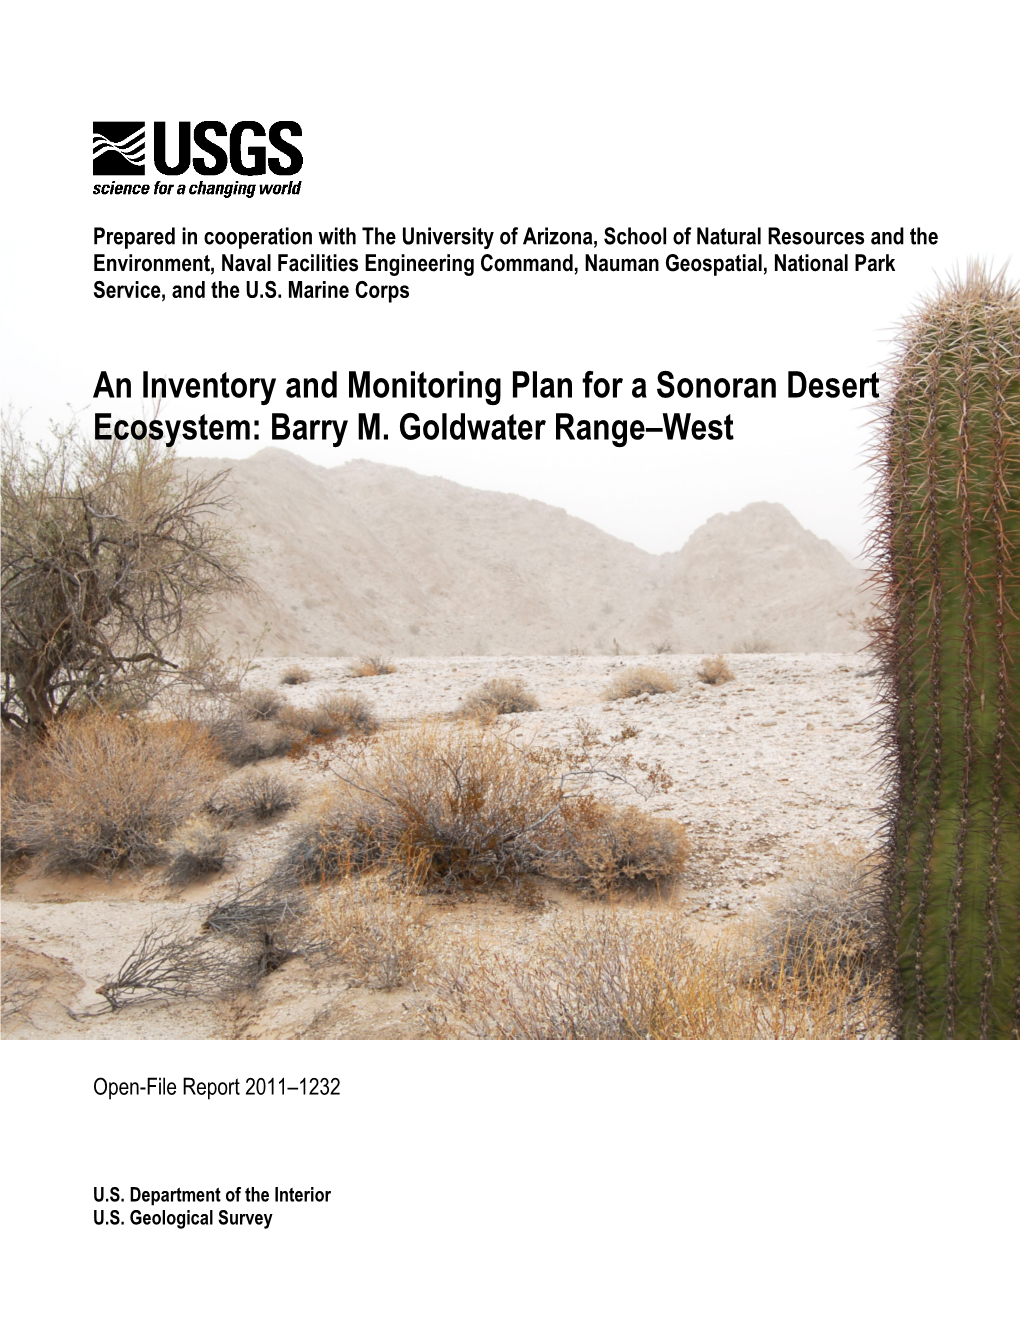 An Inventory and Monitoring Plan for a Sonoran Desert Ecosystem: Barry M